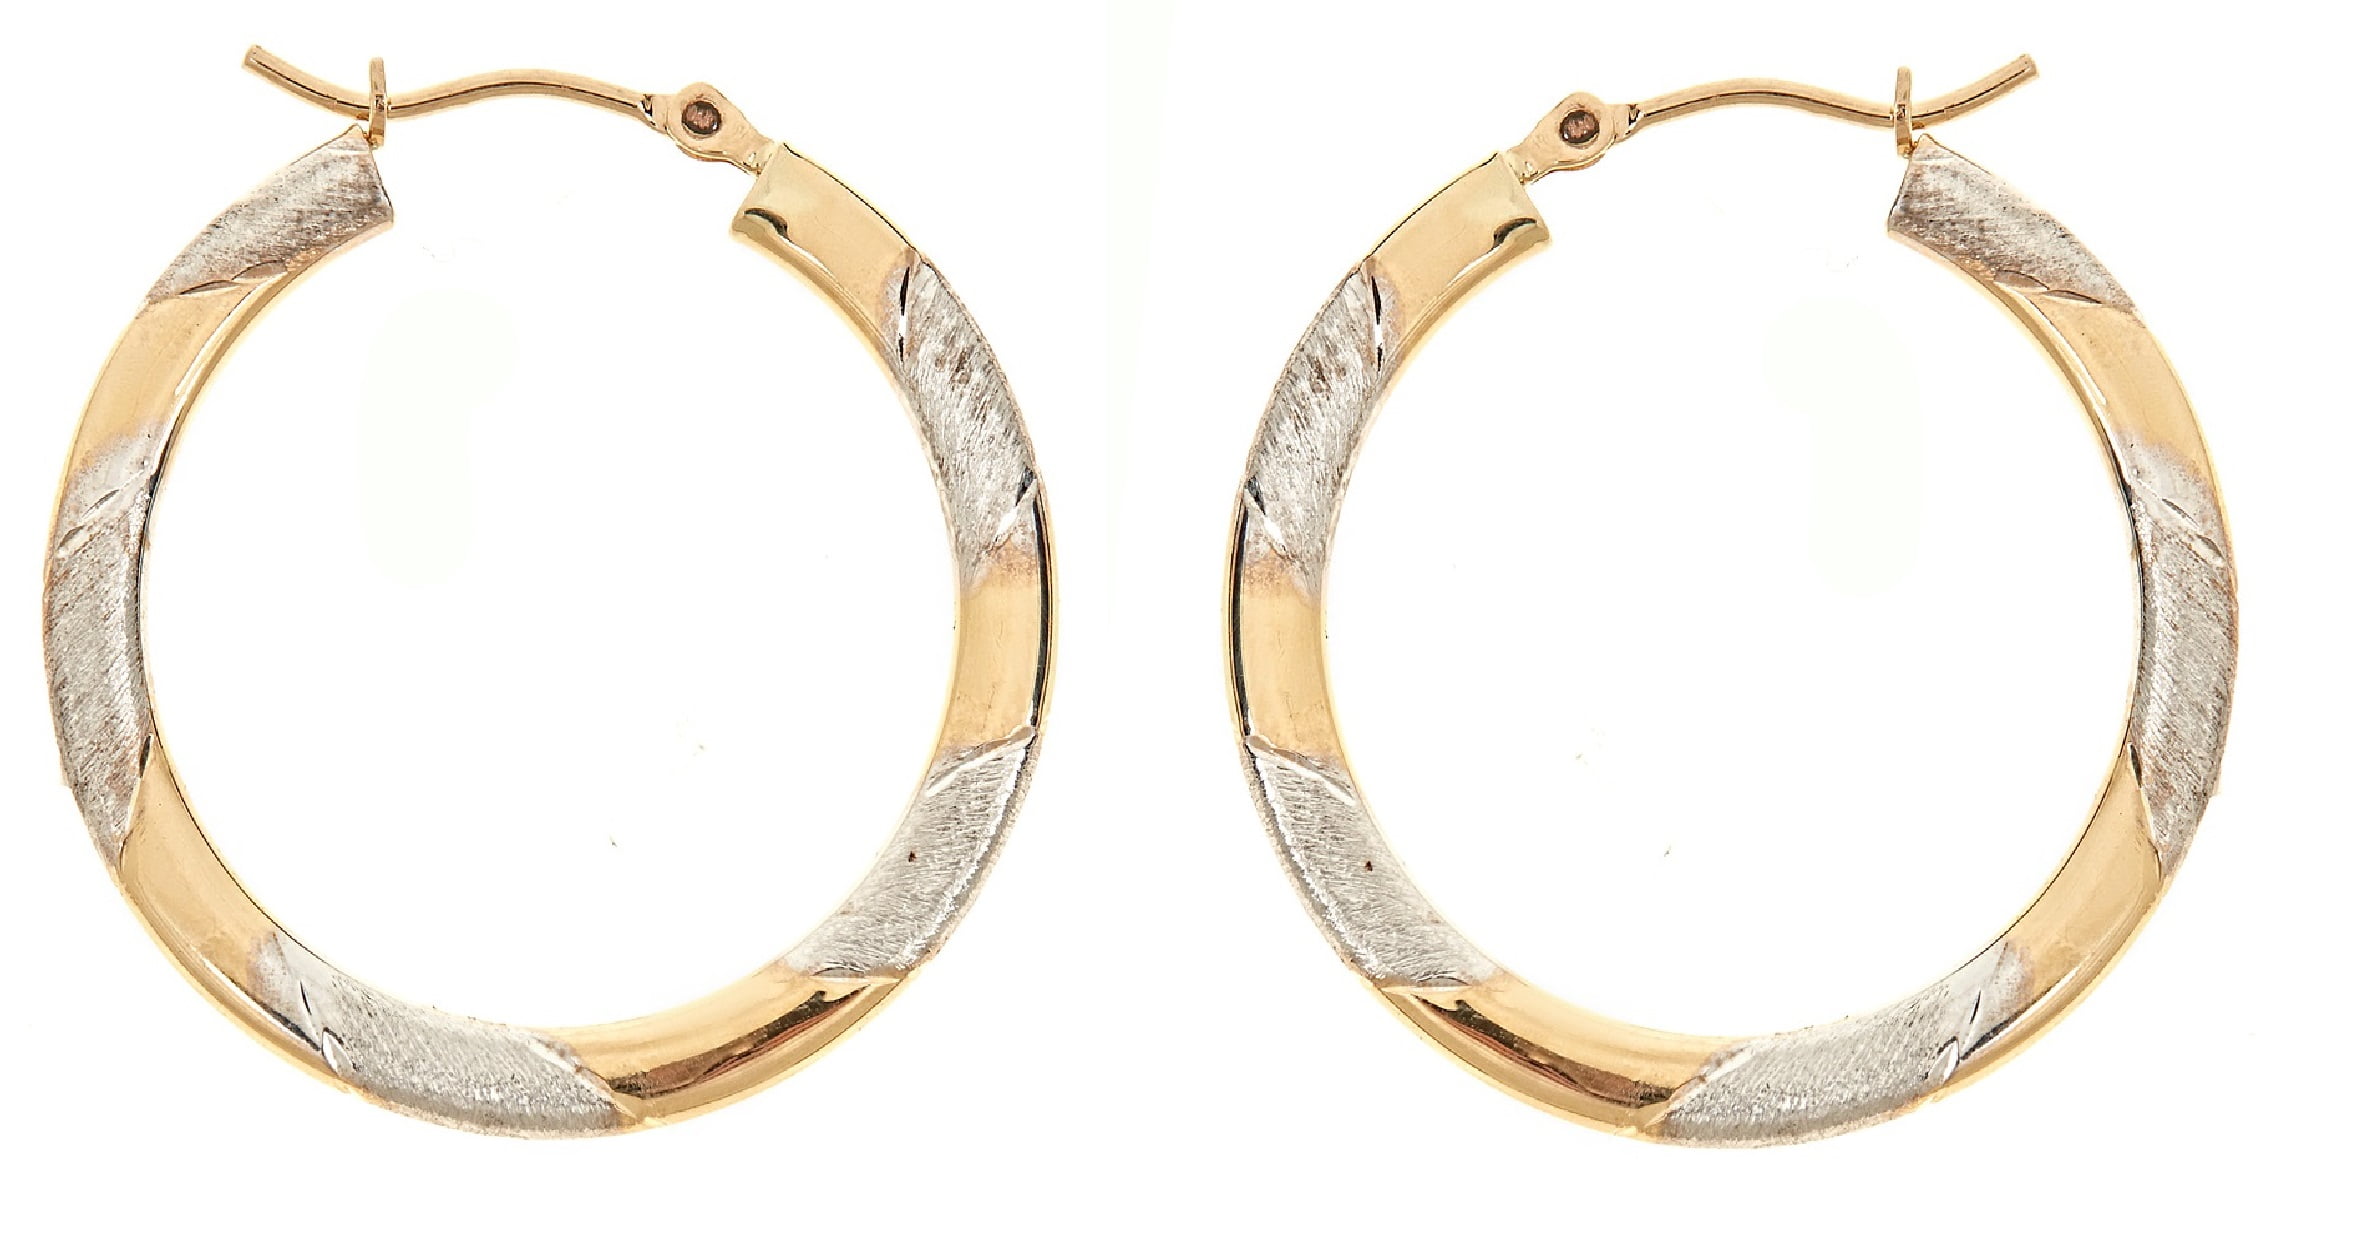 Body Expressions - 14kt Yellow Gold Hoop Earrings In Two-Tone 30mmX3mm ...